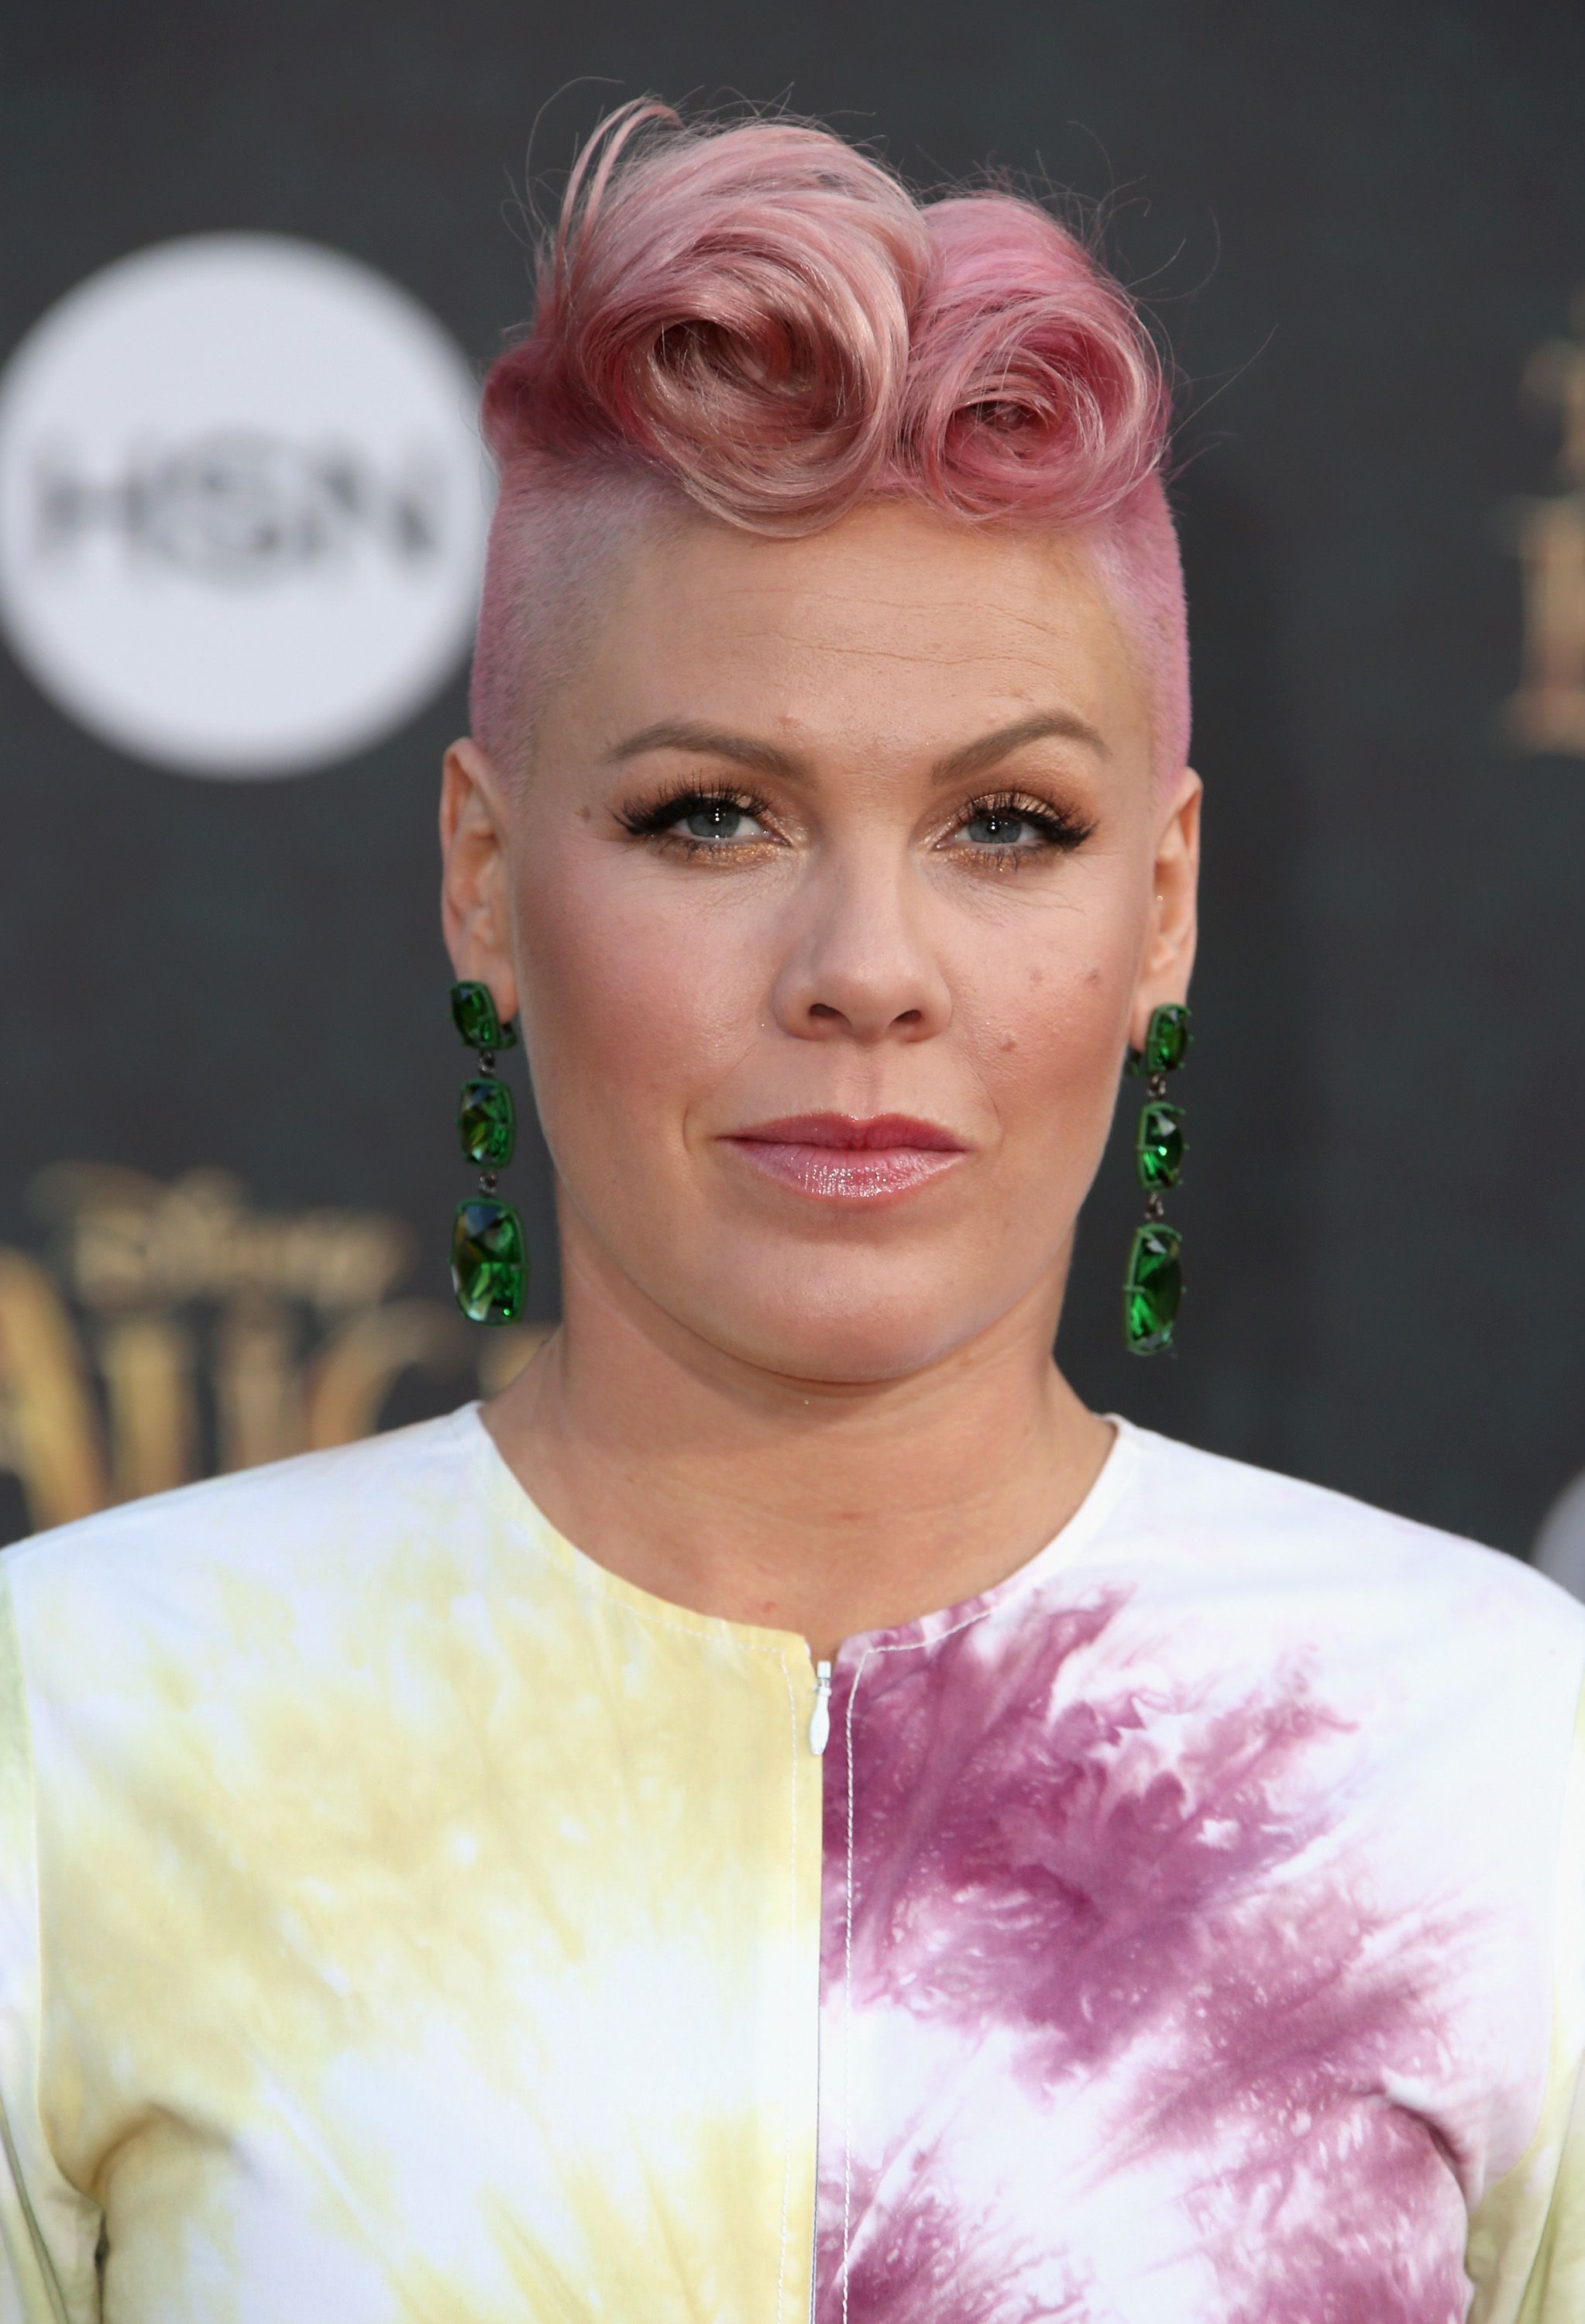 P!nk at the premiere of Disney's "Alice Through The Looking Glass at the El Capitan Theatre on May 23, 2016 in Hollywood, California | Photo: Getty Images 